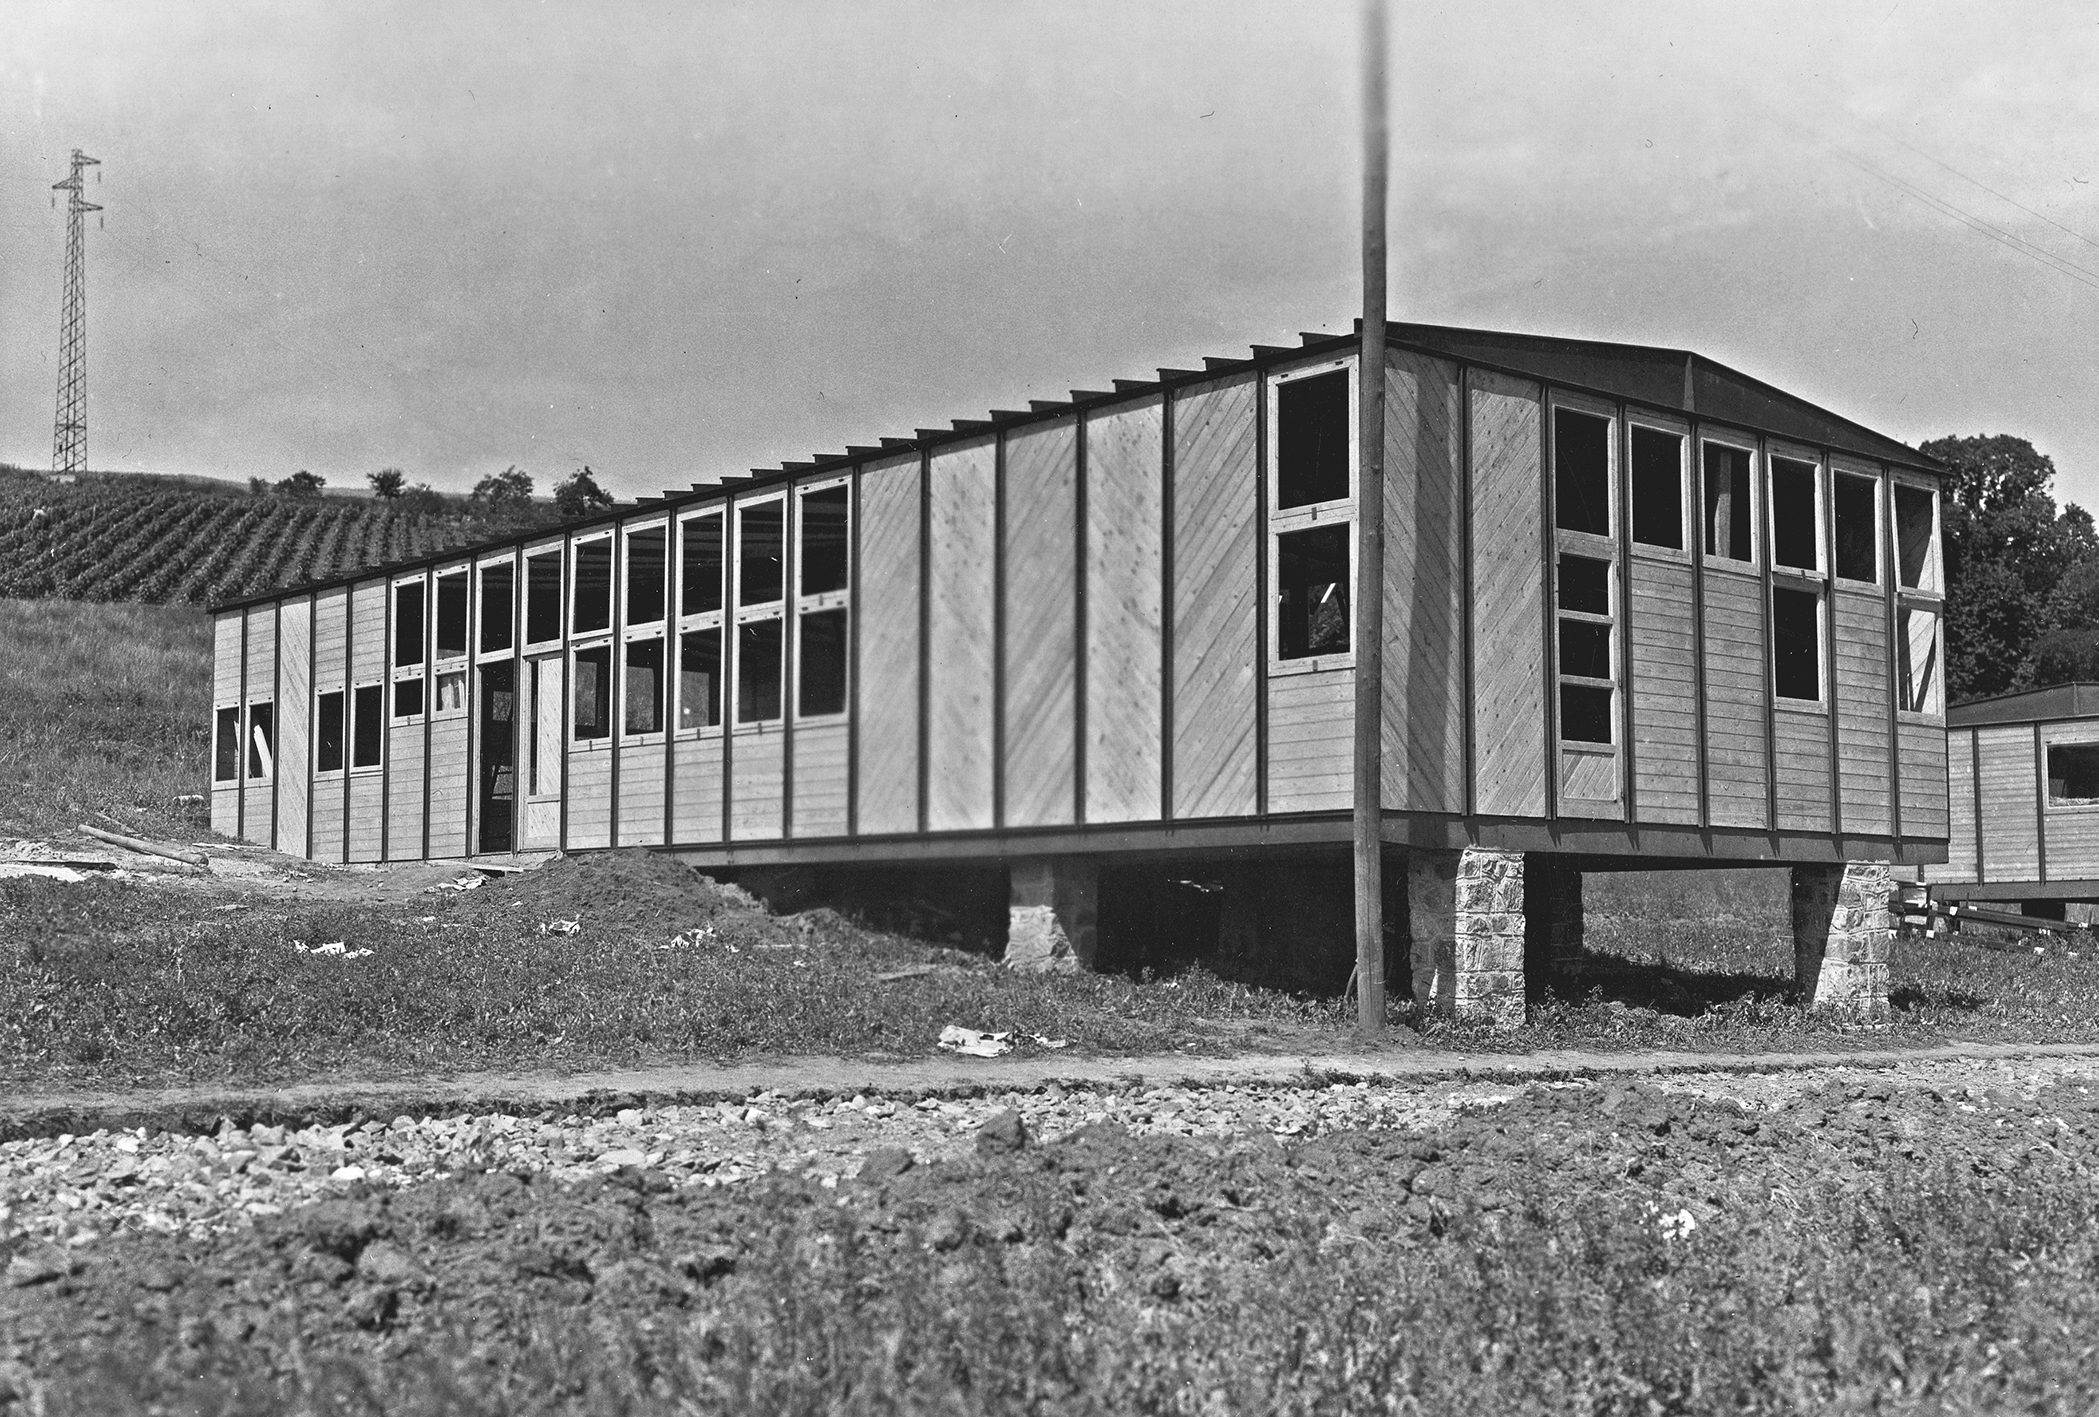 SCAL clubhouse pavilion. Constructive system Jean Prouvé, Pierre Jeanneret, architect. Building serving as refectory and meeting room, Issoire, July 1940.